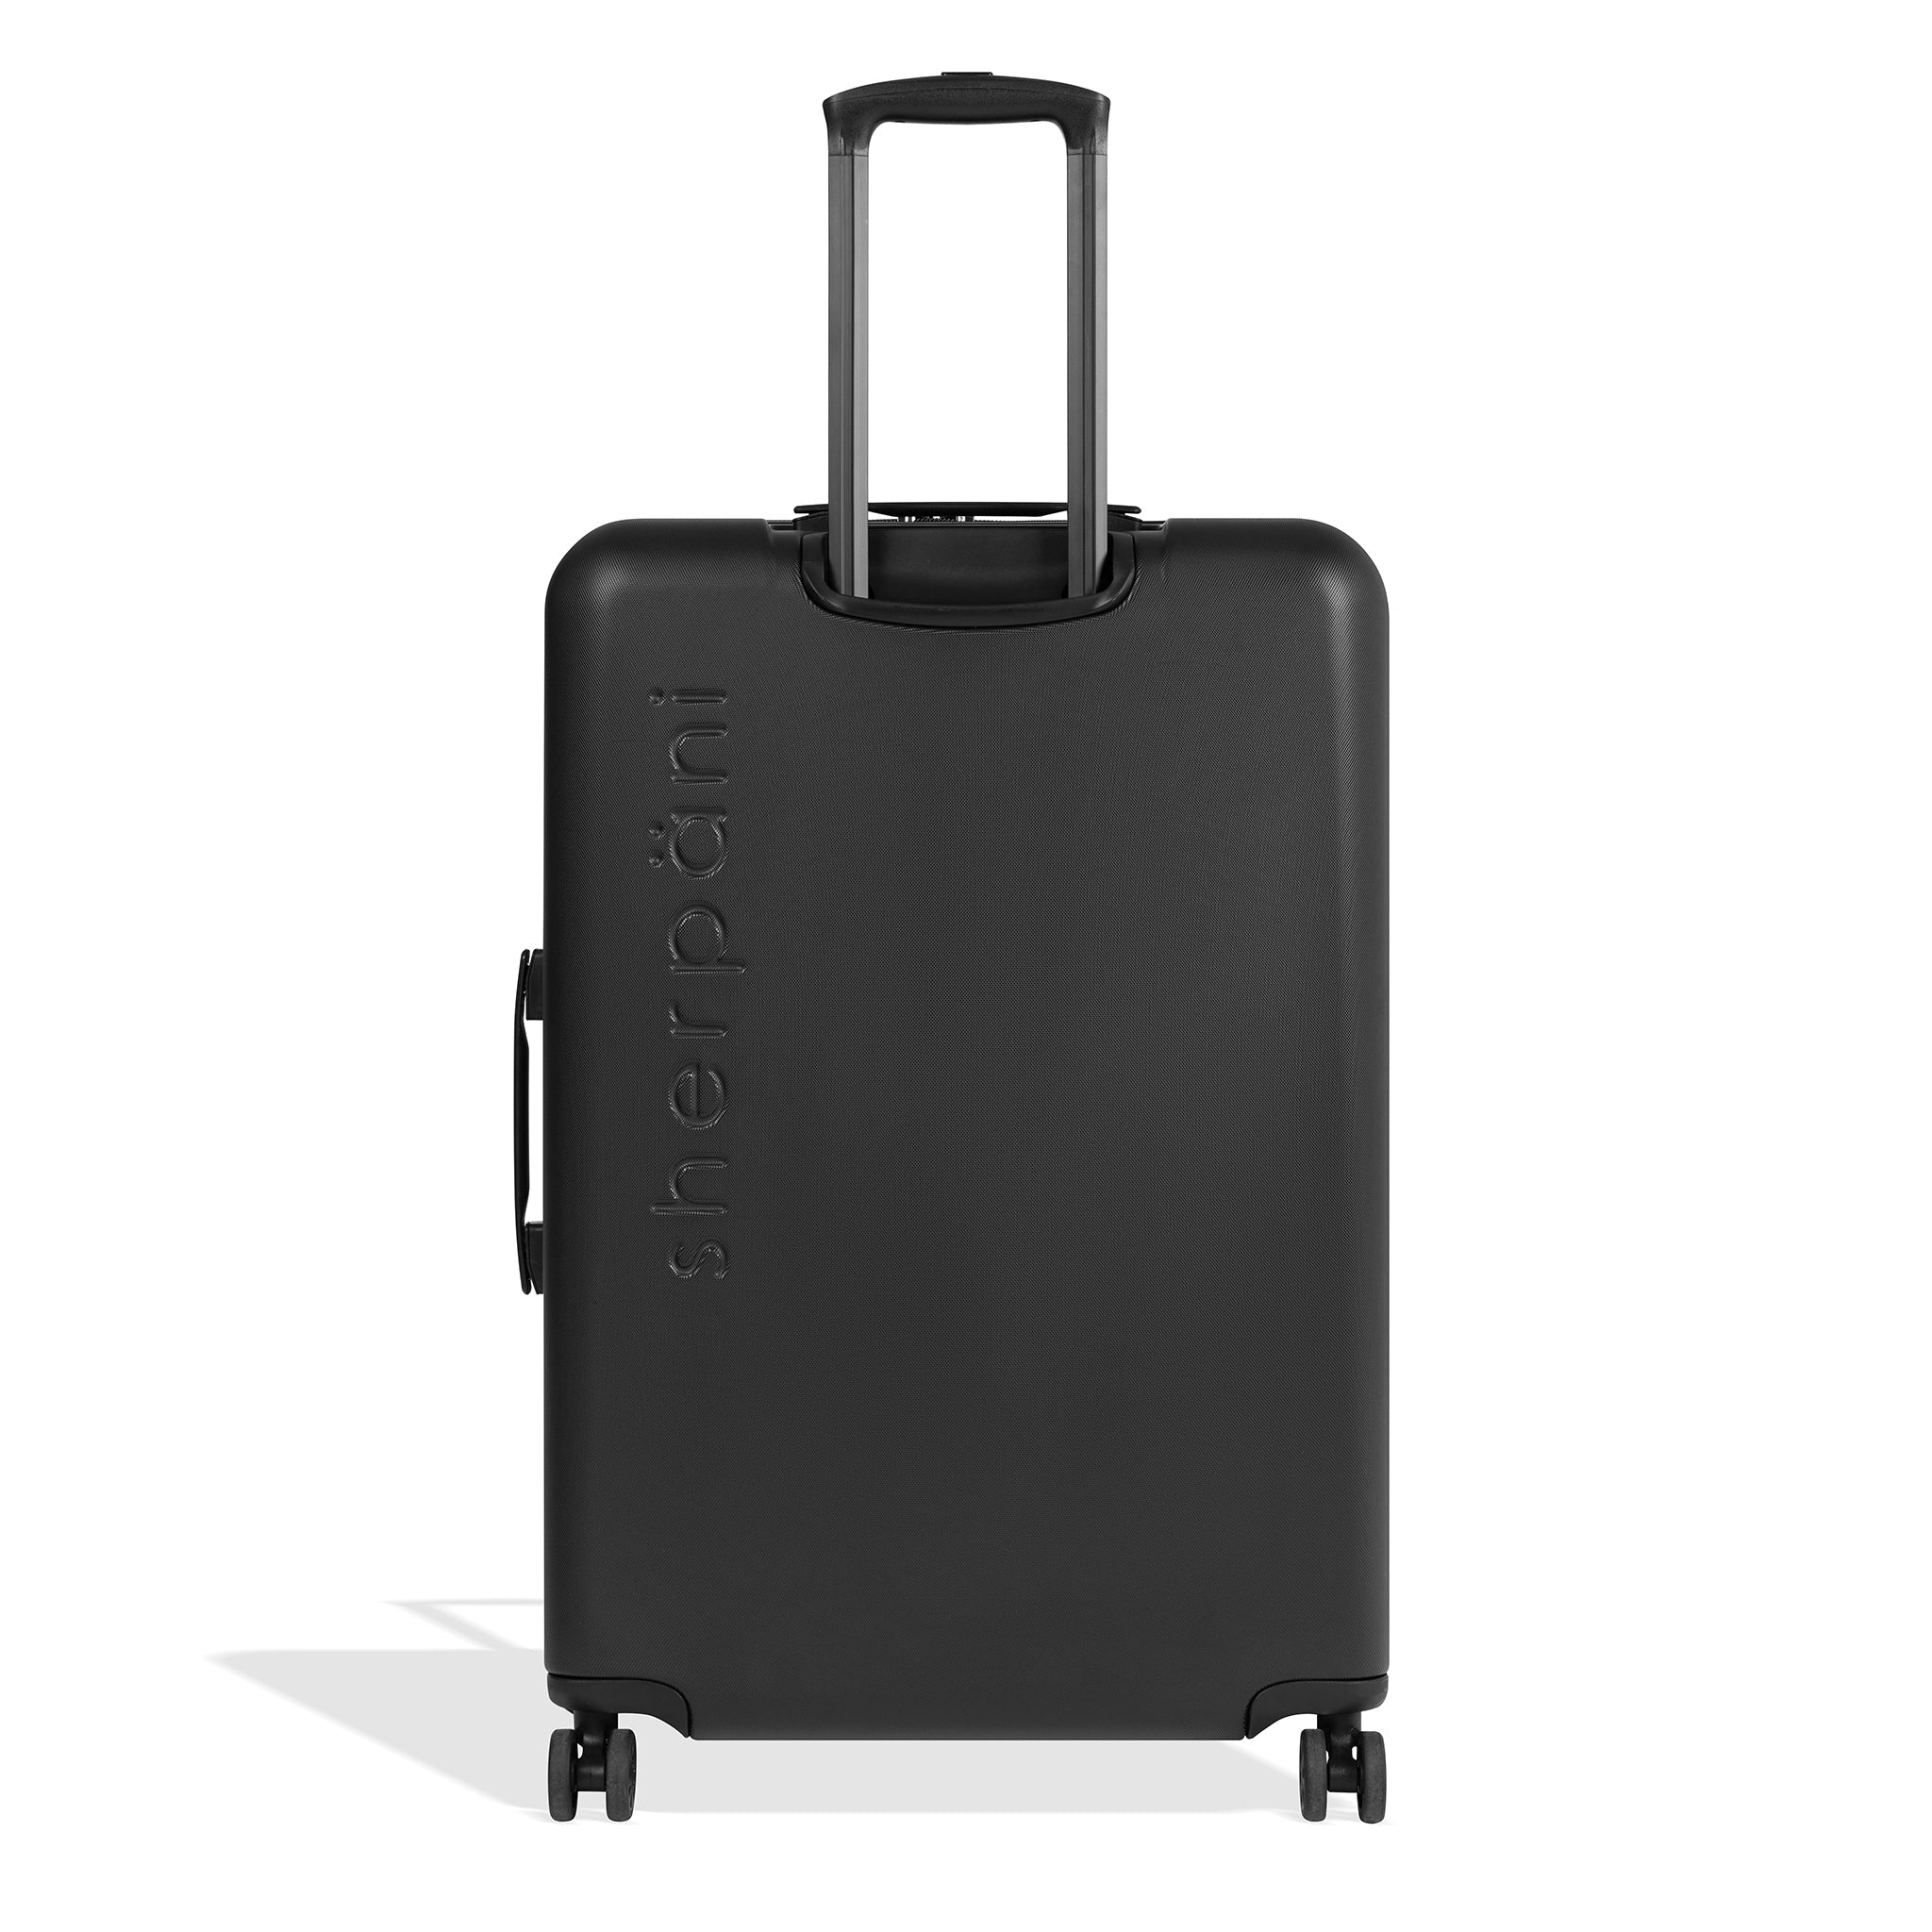 Back view of Sherpani hard-shell checked luggage, the Meridian in Black. Meridian features include a retractable luggage handle, uncrushable exterior, TSA-approved locking zippers and four 36-degree spinner wheels. 